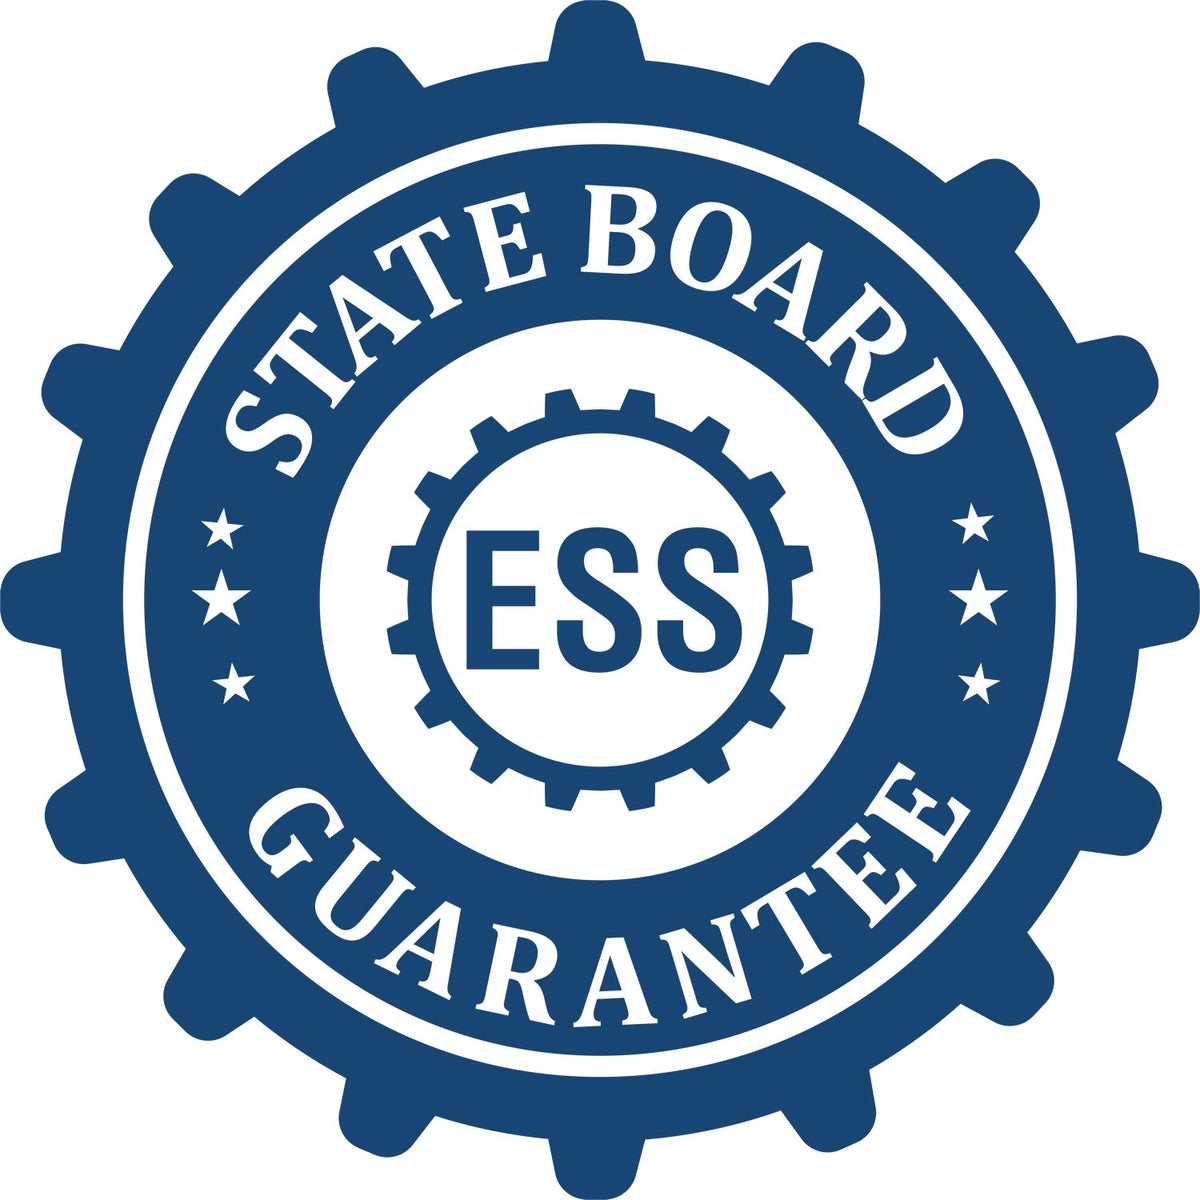 An emblem in a gear shape illustrating a state board guarantee for the Gift Nevada Land Surveyor Seal